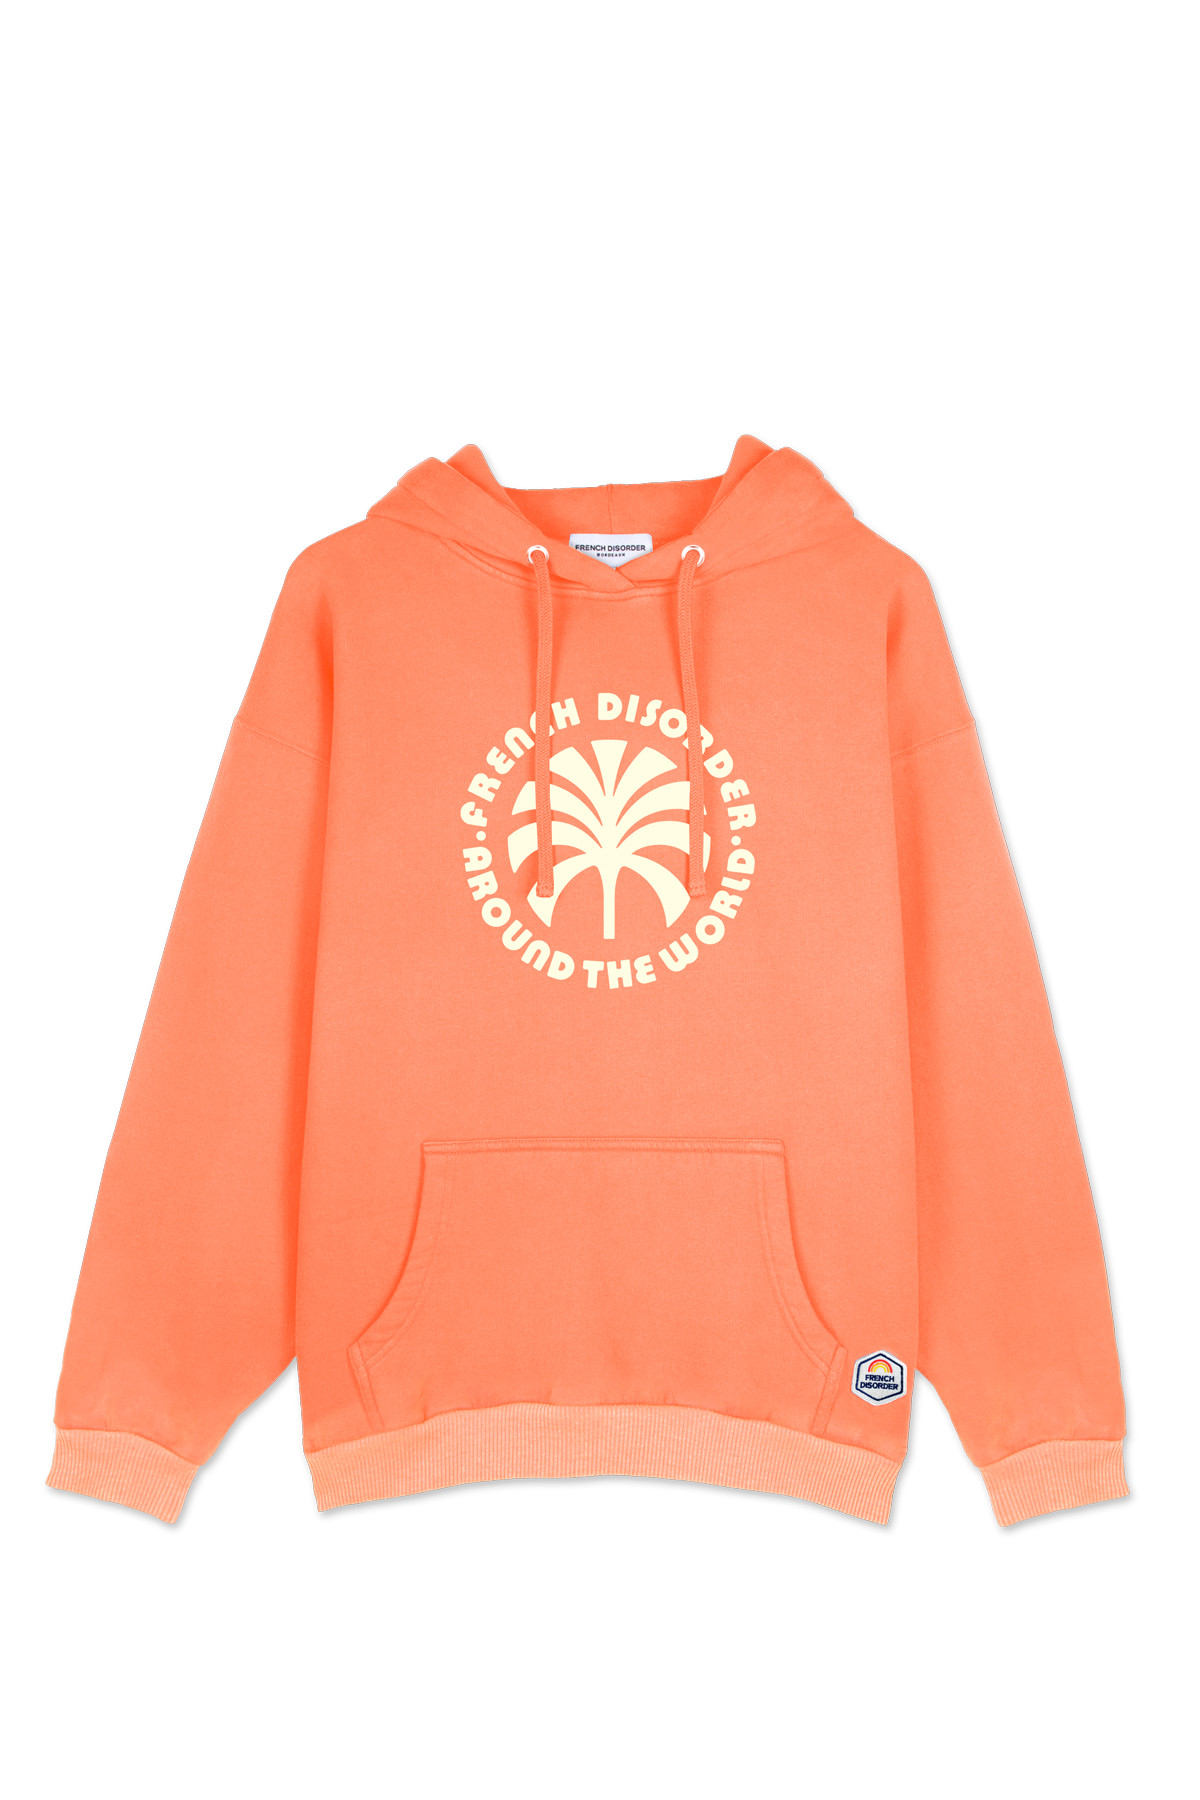 Photo de SWEATS À CAPUCHE Hoodie HOMME Washed THE PALM chez French Disorder